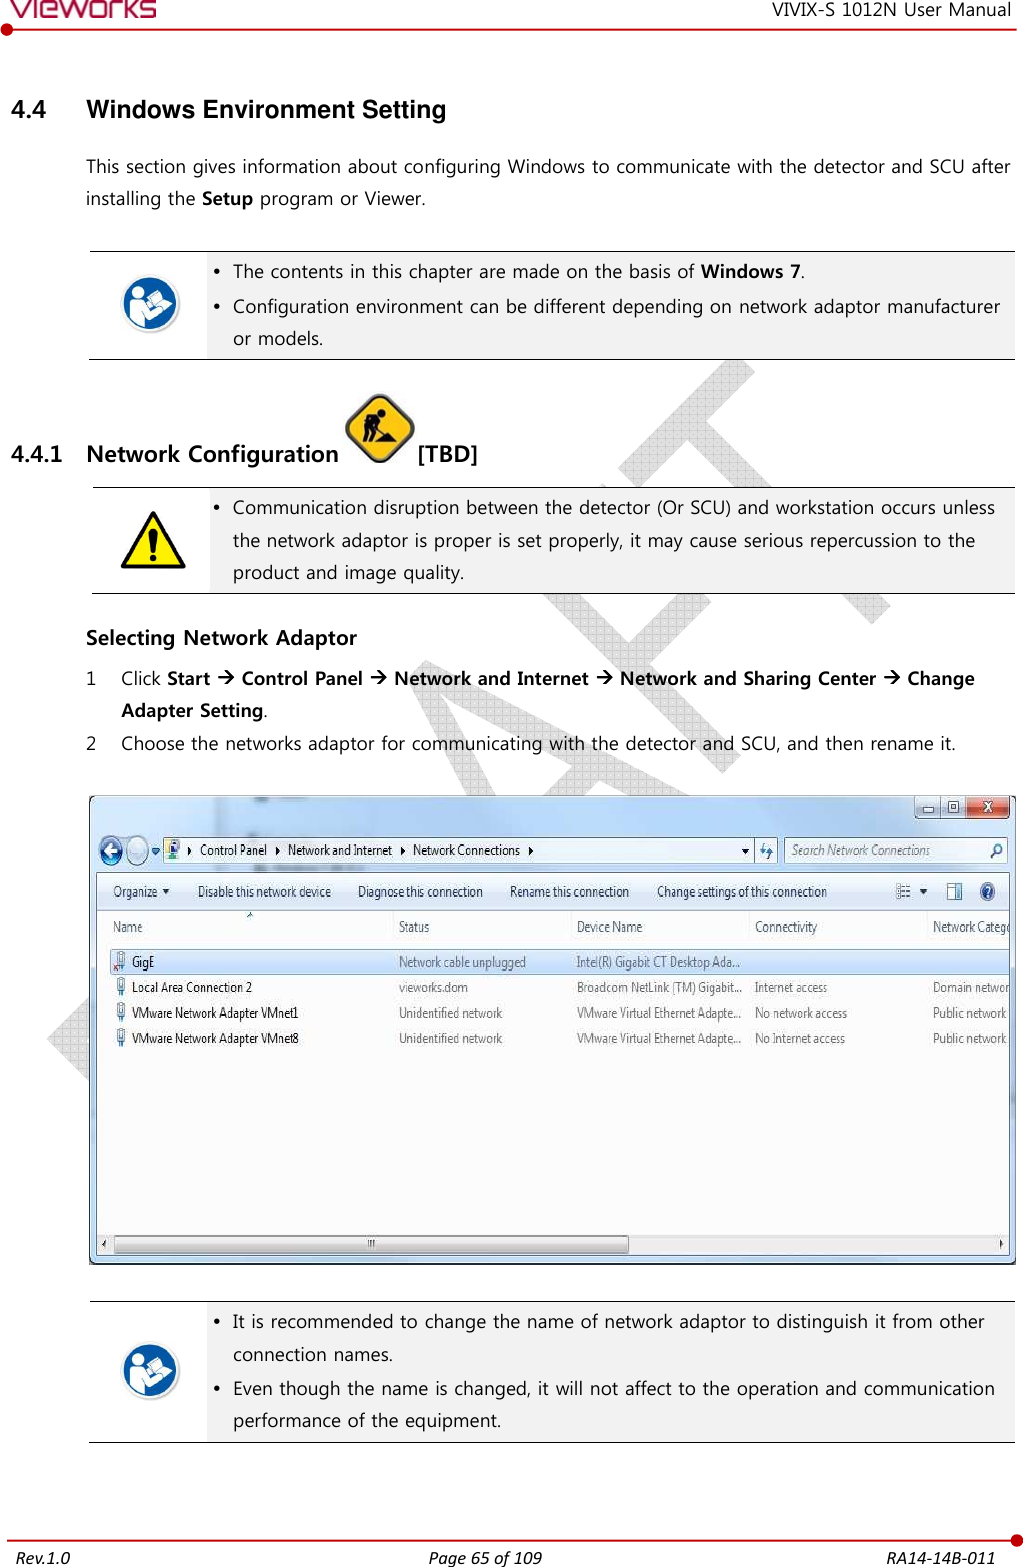   Rev.1.0 Page 65 of 109  RA14-14B-011 VIVIX-S 1012N User Manual 4.4  Windows Environment Setting This section gives information about configuring Windows to communicate with the detector and SCU after installing the Setup program or Viewer.    The contents in this chapter are made on the basis of Windows 7.  Configuration environment can be different depending on network adaptor manufacturer or models. 4.4.1 Network Configuration [TBD]   Communication disruption between the detector (Or SCU) and workstation occurs unless the network adaptor is proper is set properly, it may cause serious repercussion to the product and image quality.  Selecting Network Adaptor 1 Click Start  Control Panel  Network and Internet  Network and Sharing Center  Change Adapter Setting. 2 Choose the networks adaptor for communicating with the detector and SCU, and then rename it.      It is recommended to change the name of network adaptor to distinguish it from other connection names.  Even though the name is changed, it will not affect to the operation and communication performance of the equipment.  